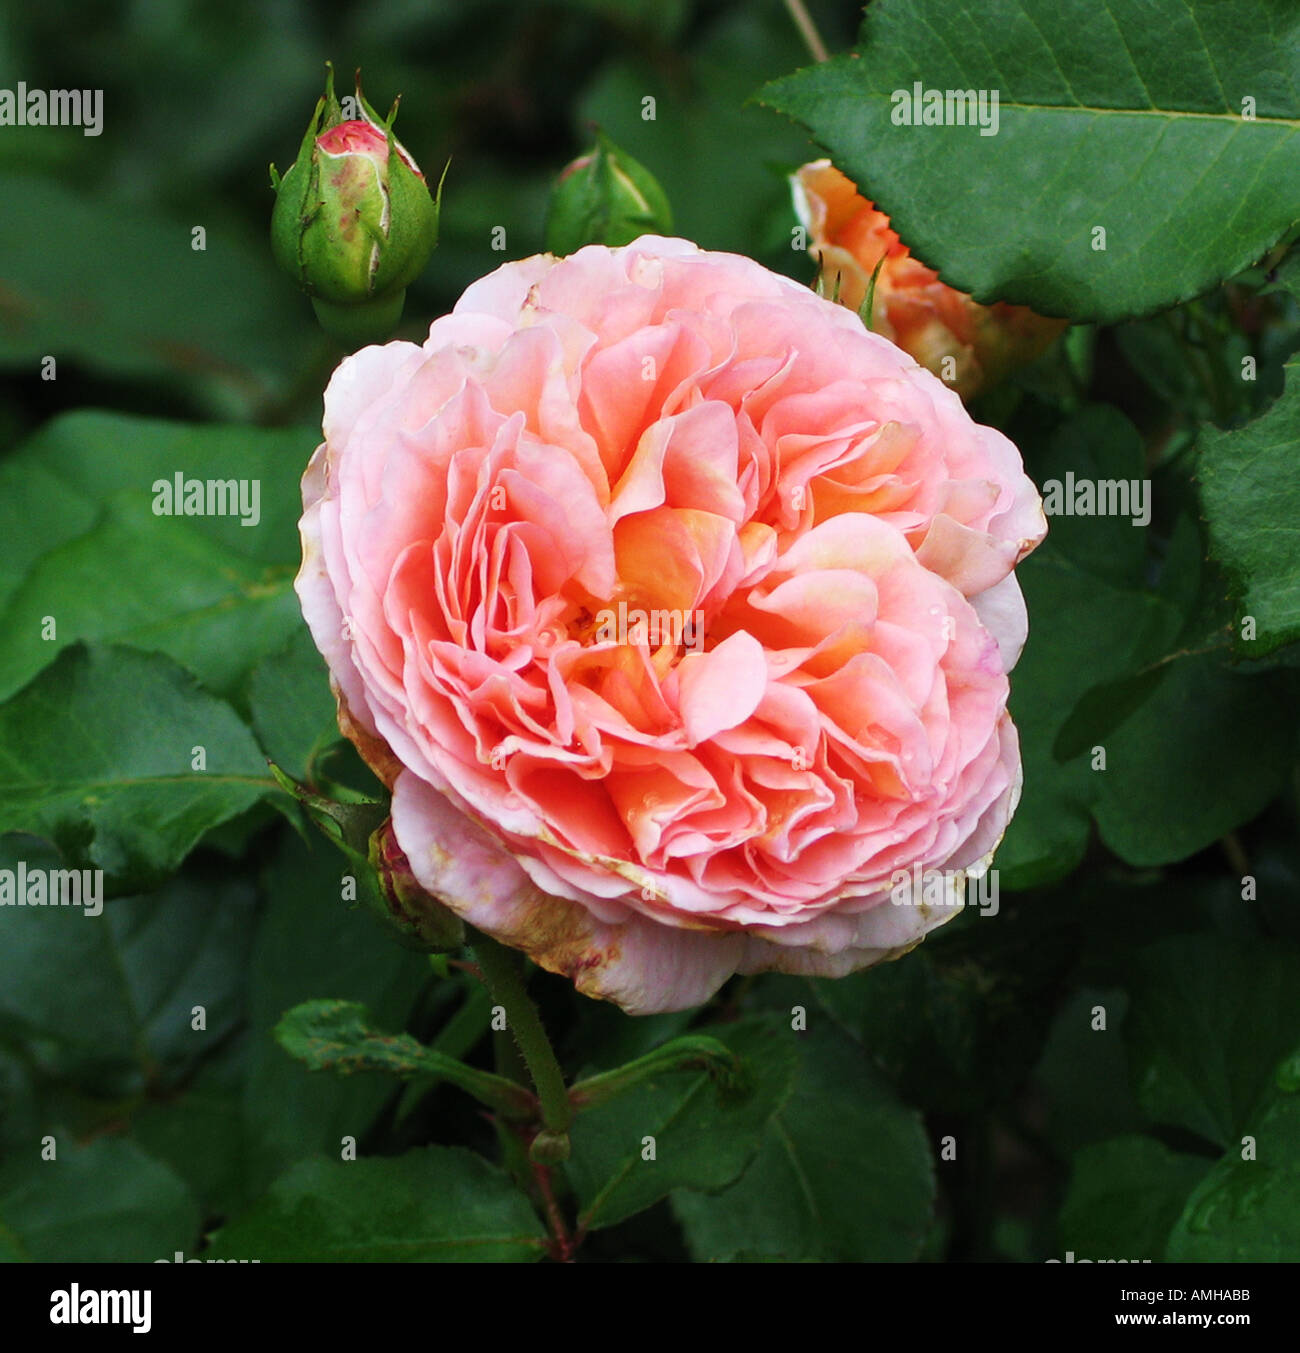 English rose in bloom Stock Photo